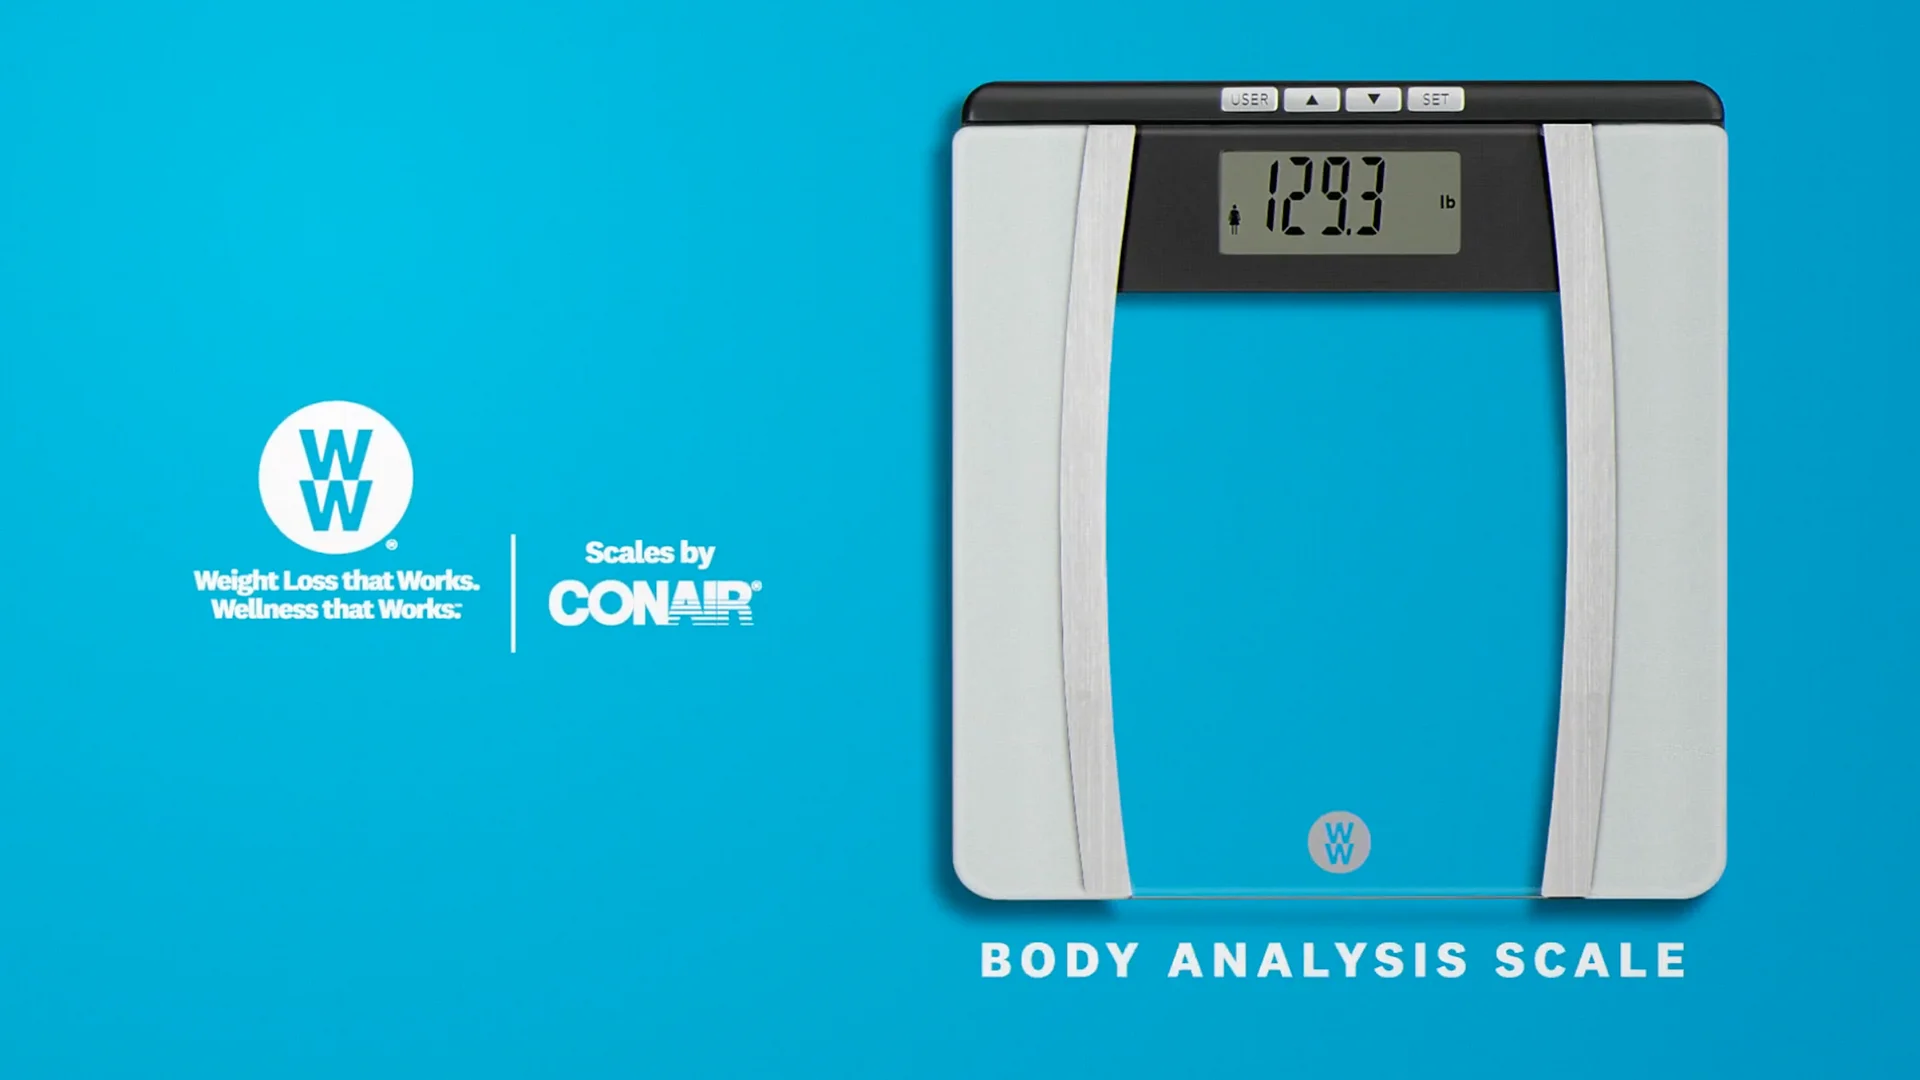 Weight Watchers Scales by Conair Digital Glass Weight Scale